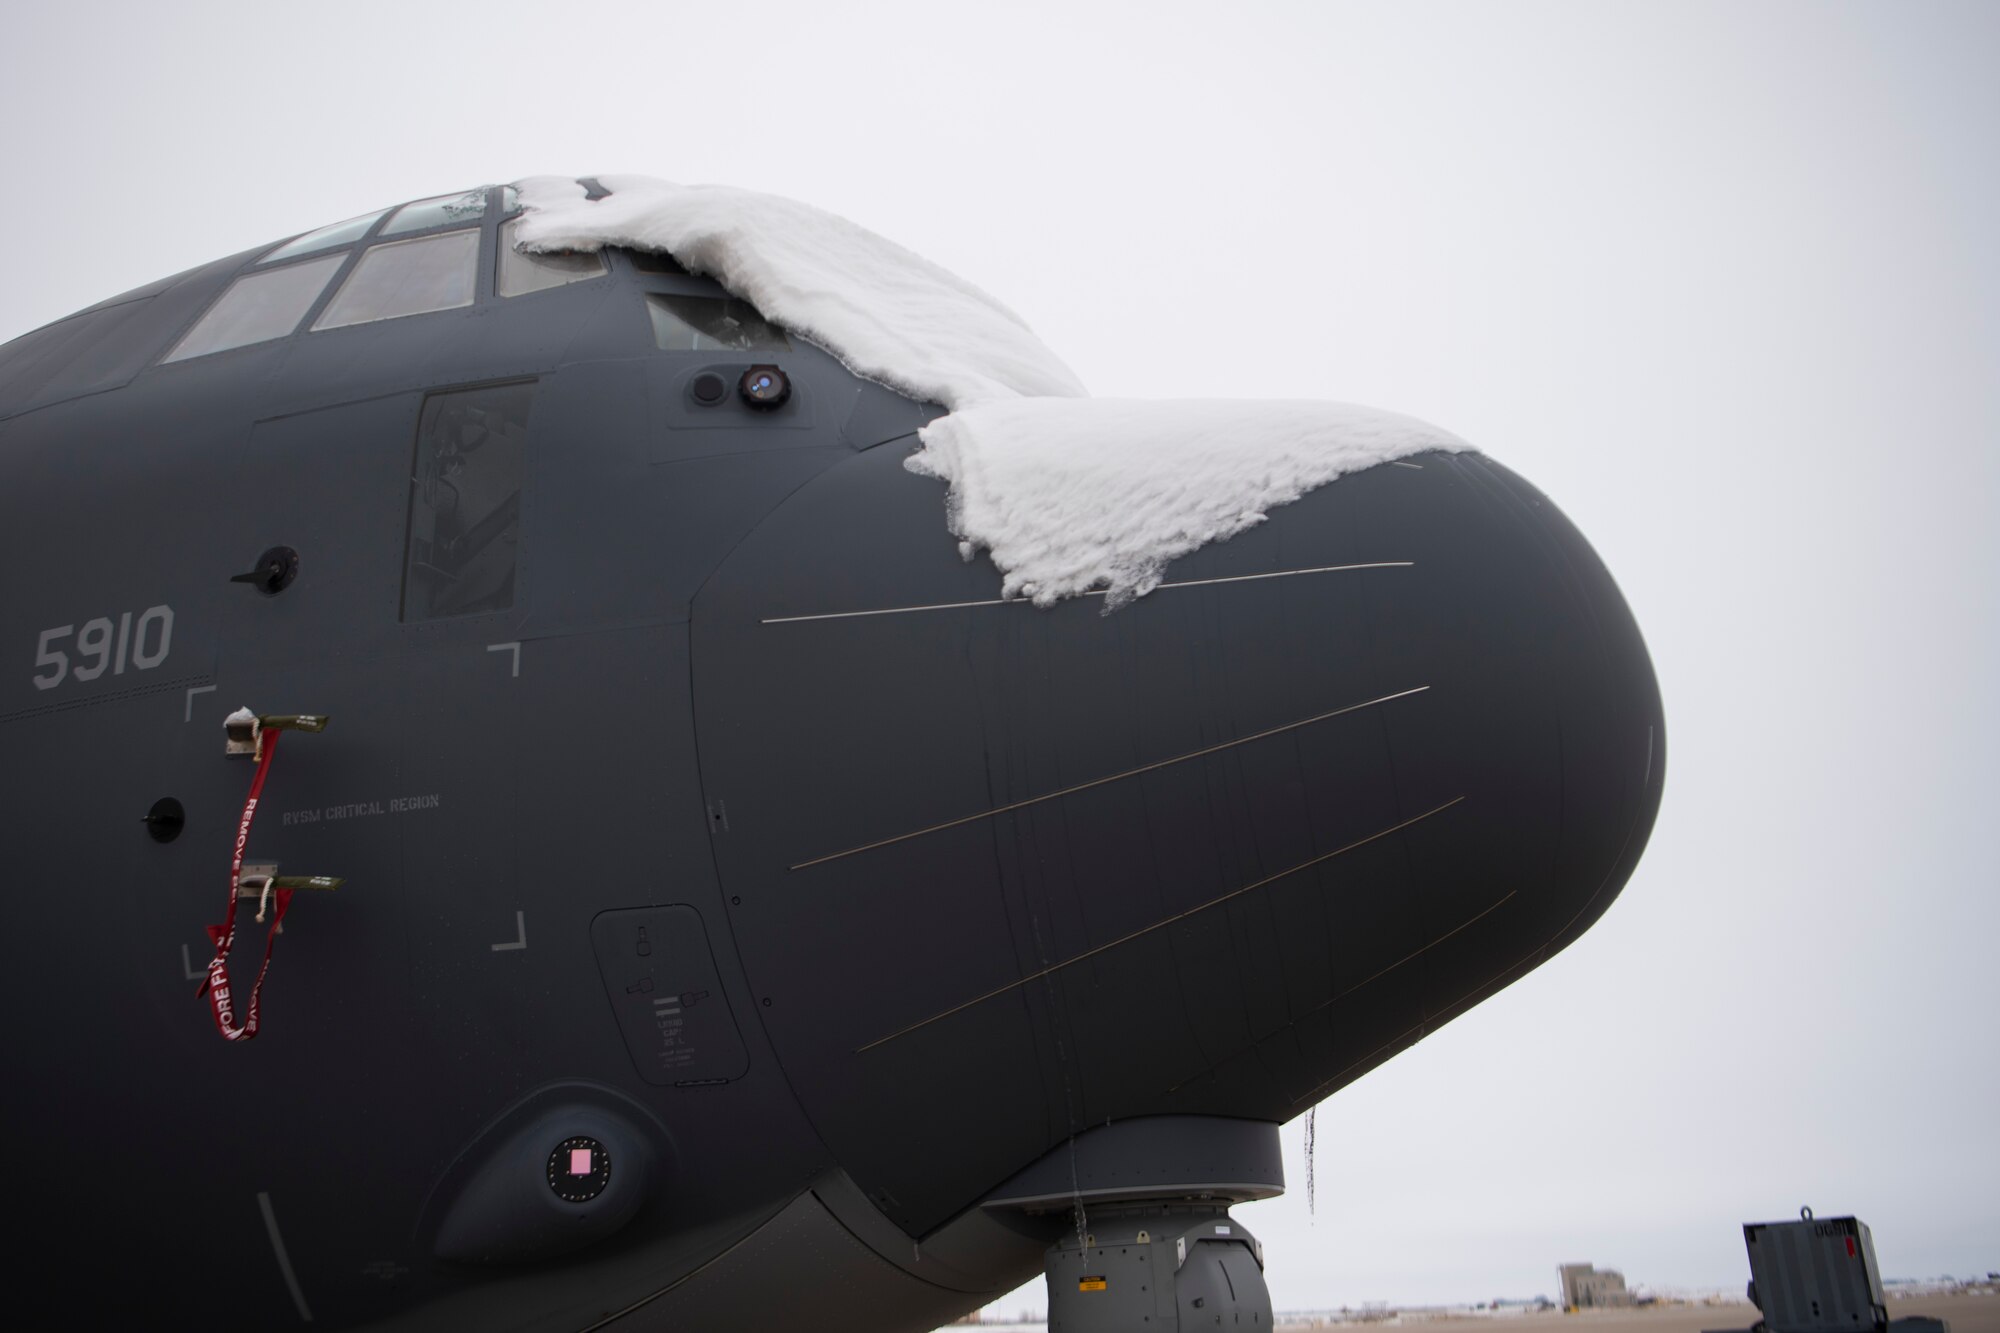 Snow lays on the nose of an AC-130 Whiskey